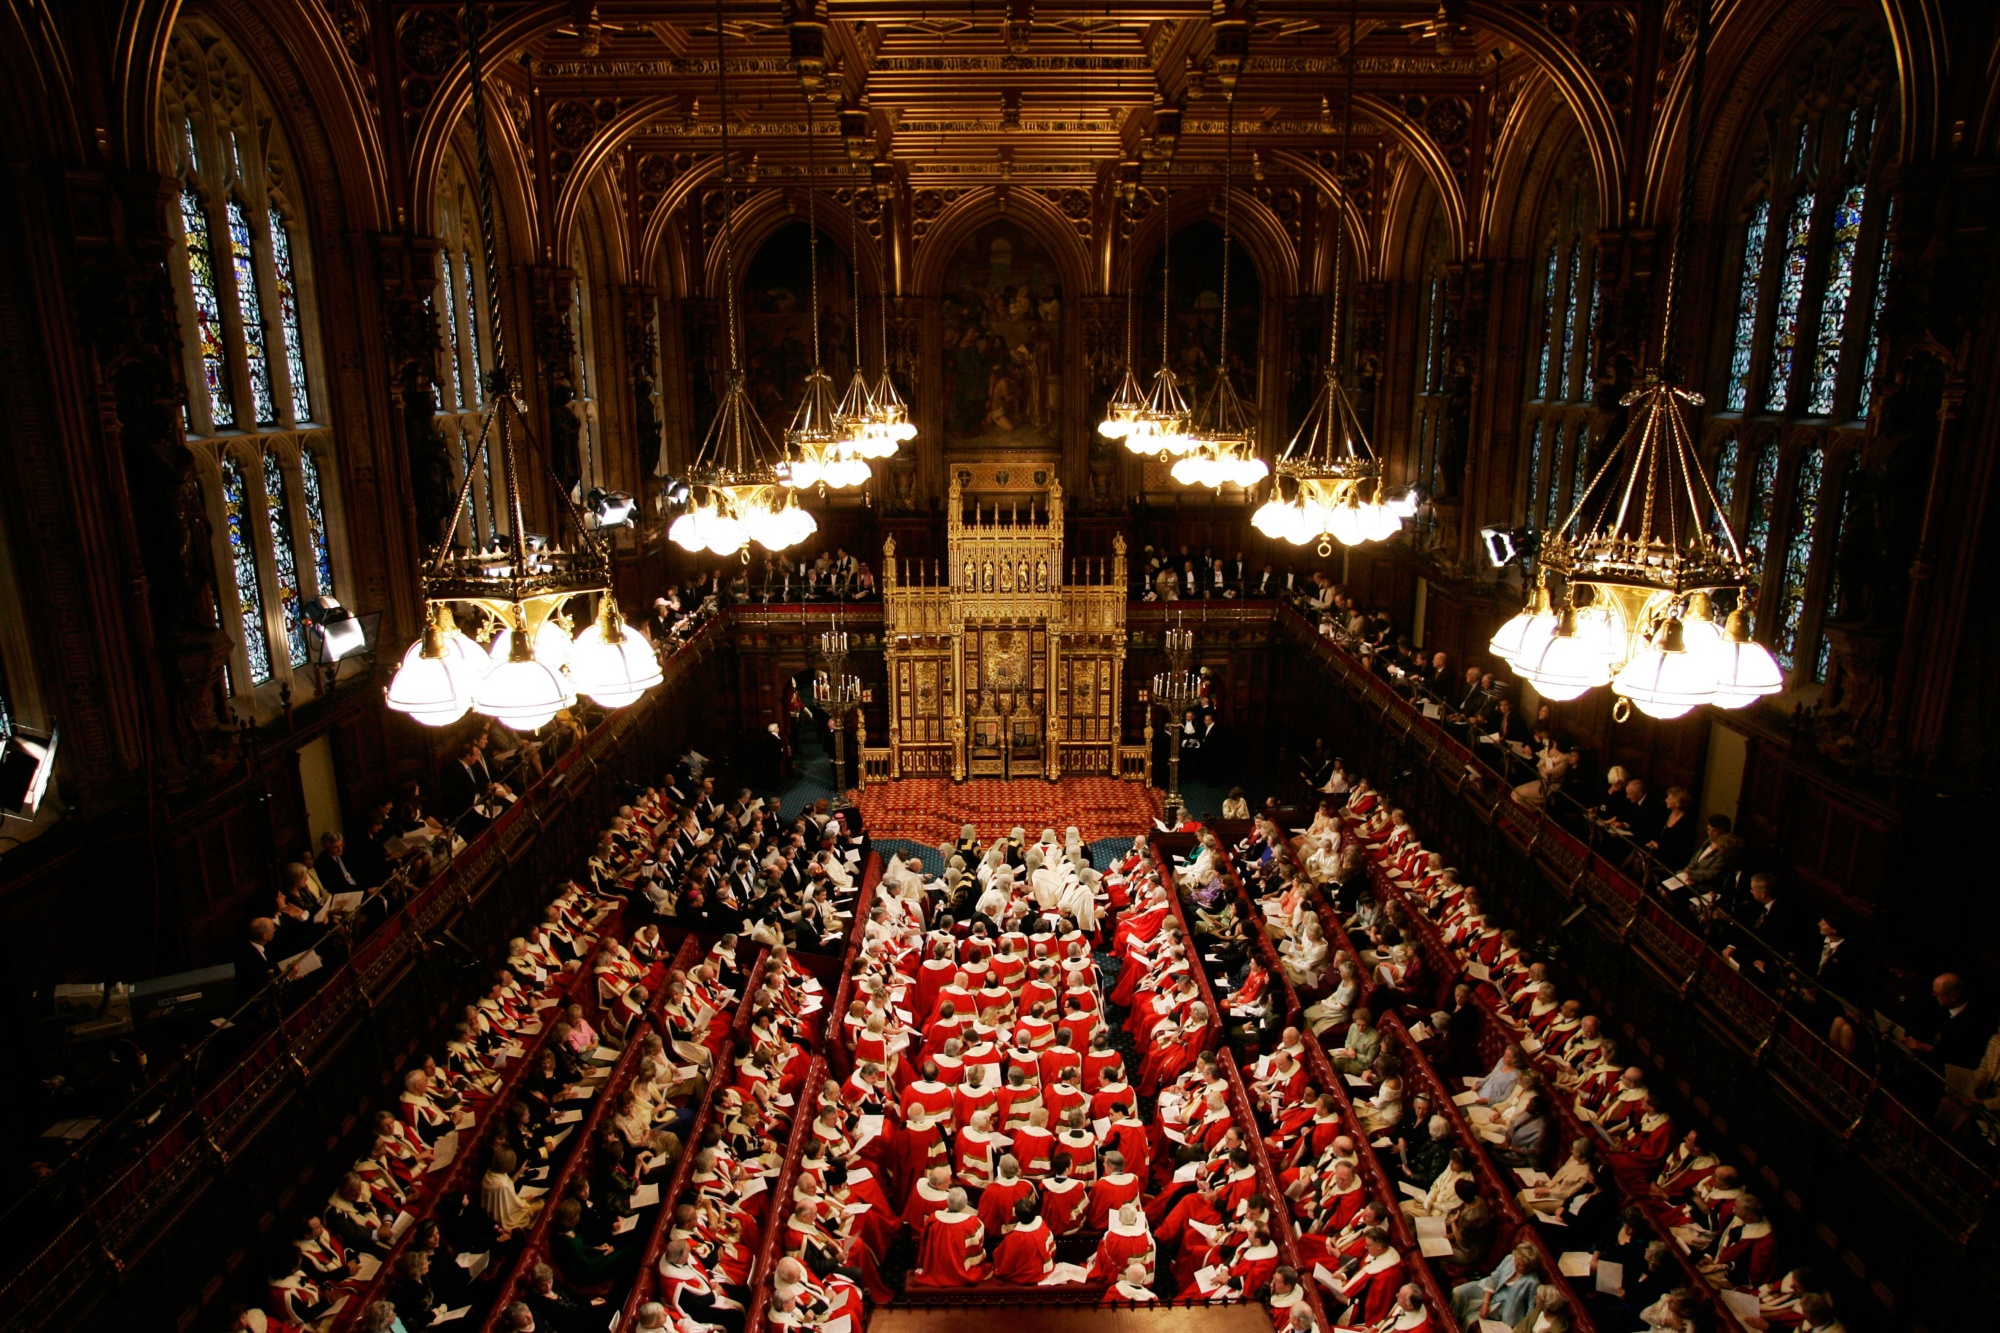 House of Lords - UK Parliament